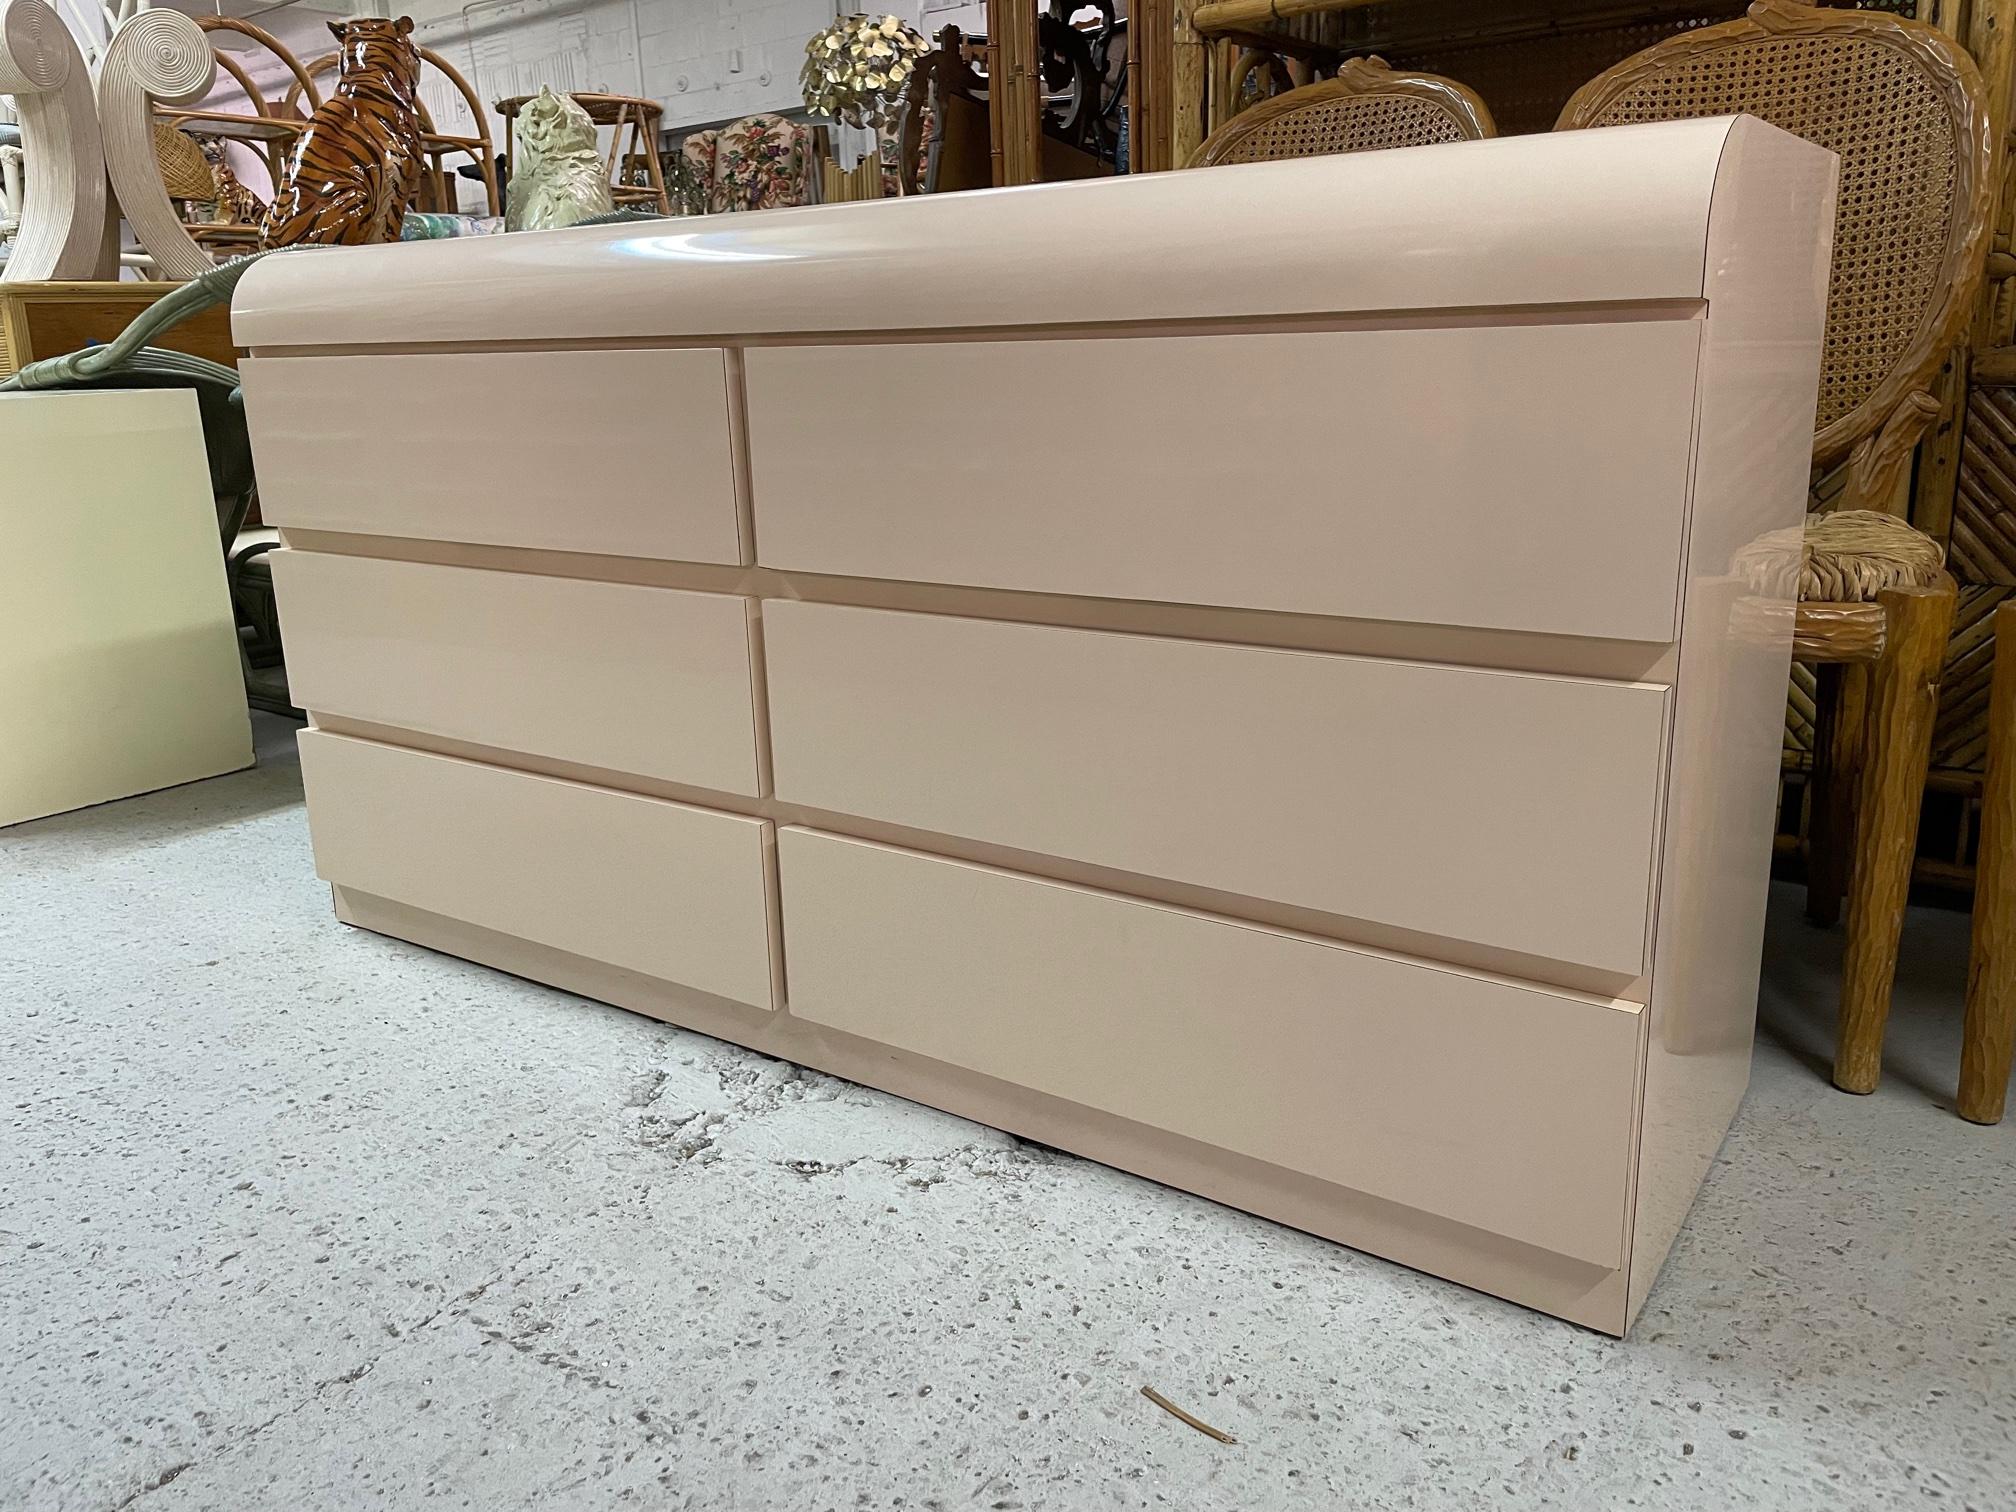 80s double dresser features smooth waterfall front and a solid plinth style base. Styling reminiscent of Karl Springer. Very good condition with only very minor imperfections and drawers operate like new.
Shipping to most of the continental US is